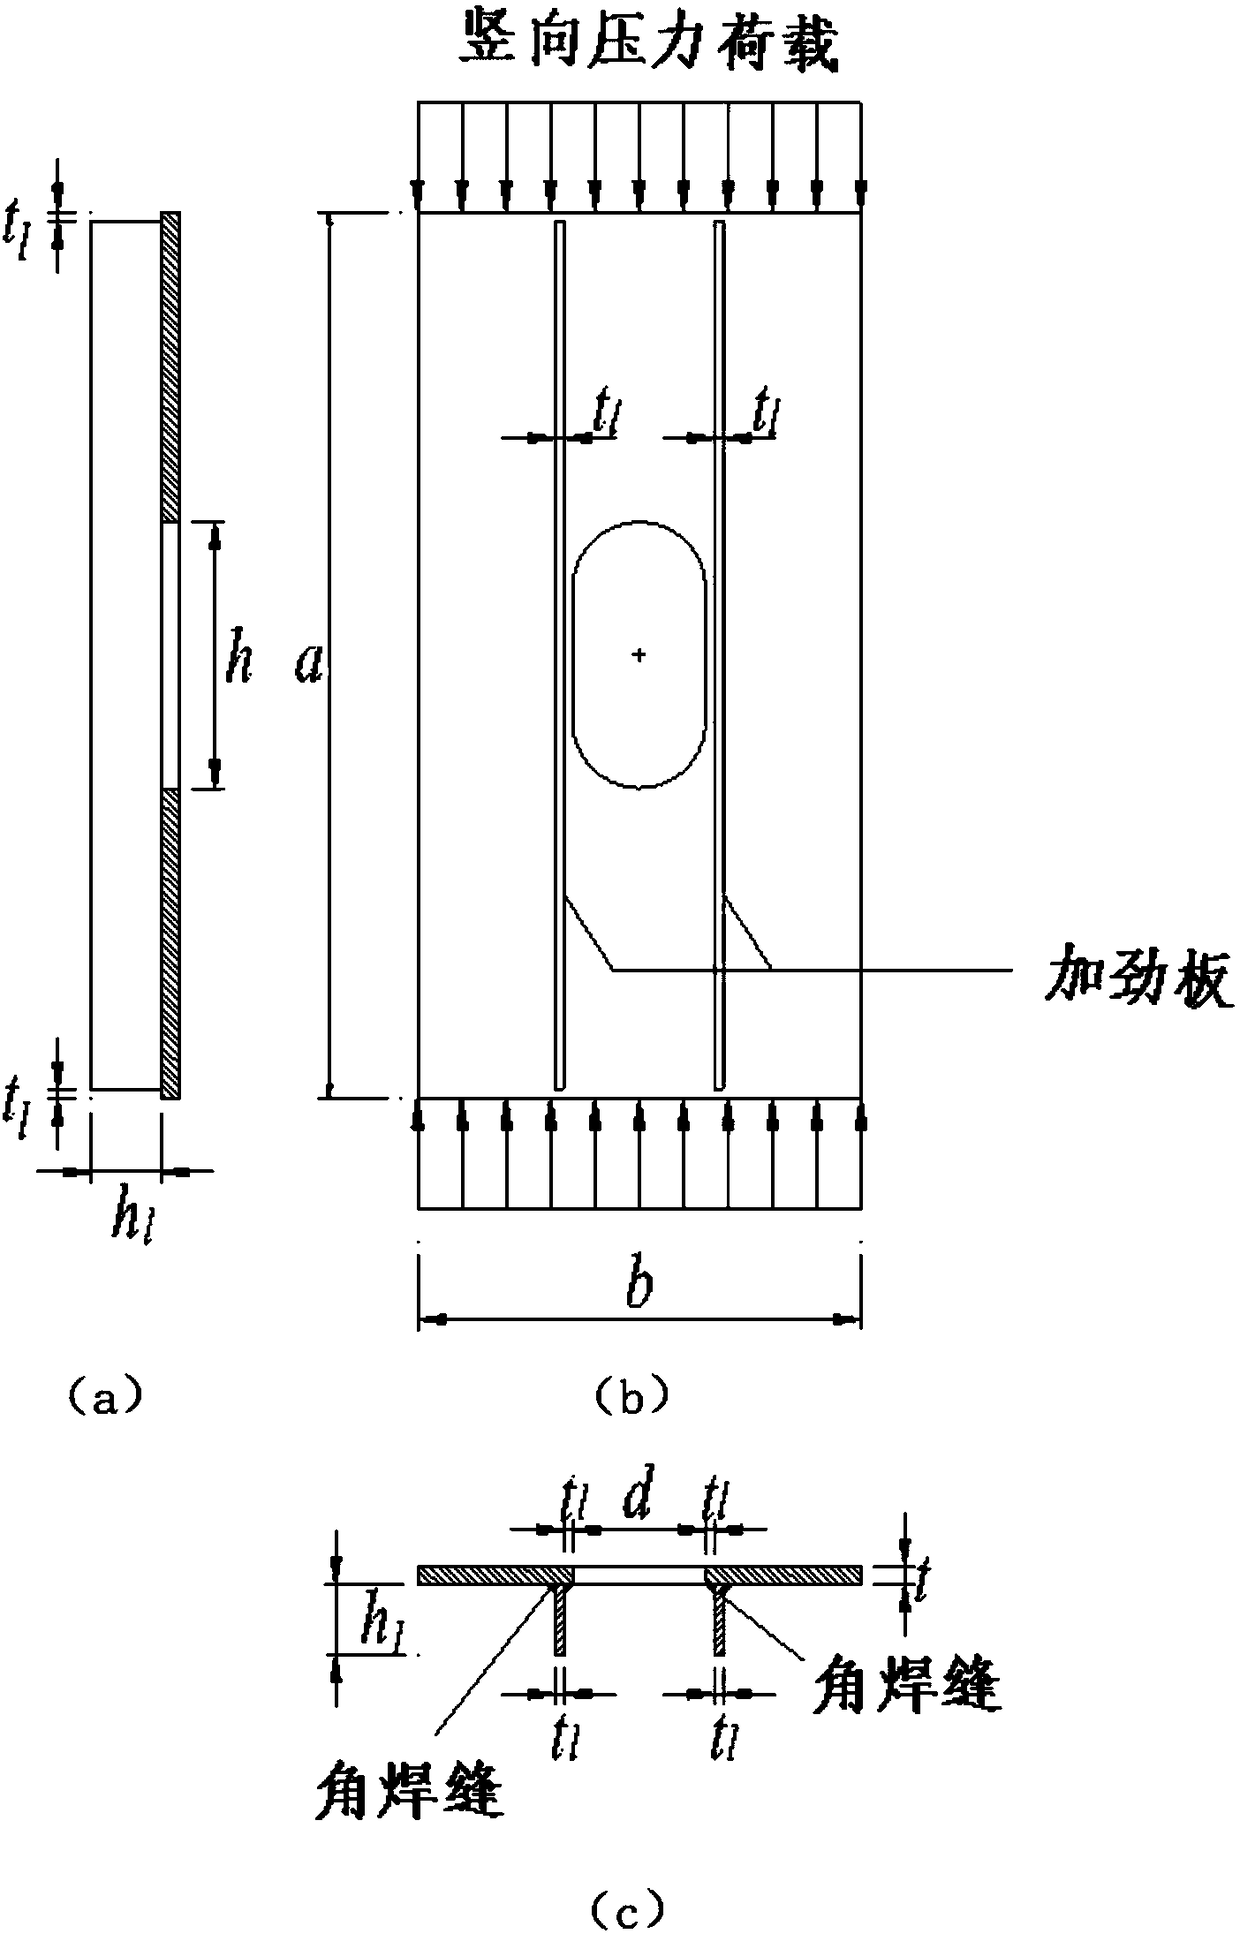 Hole edge reinforcement method of steel plate with oblong holes under uniaxial compression